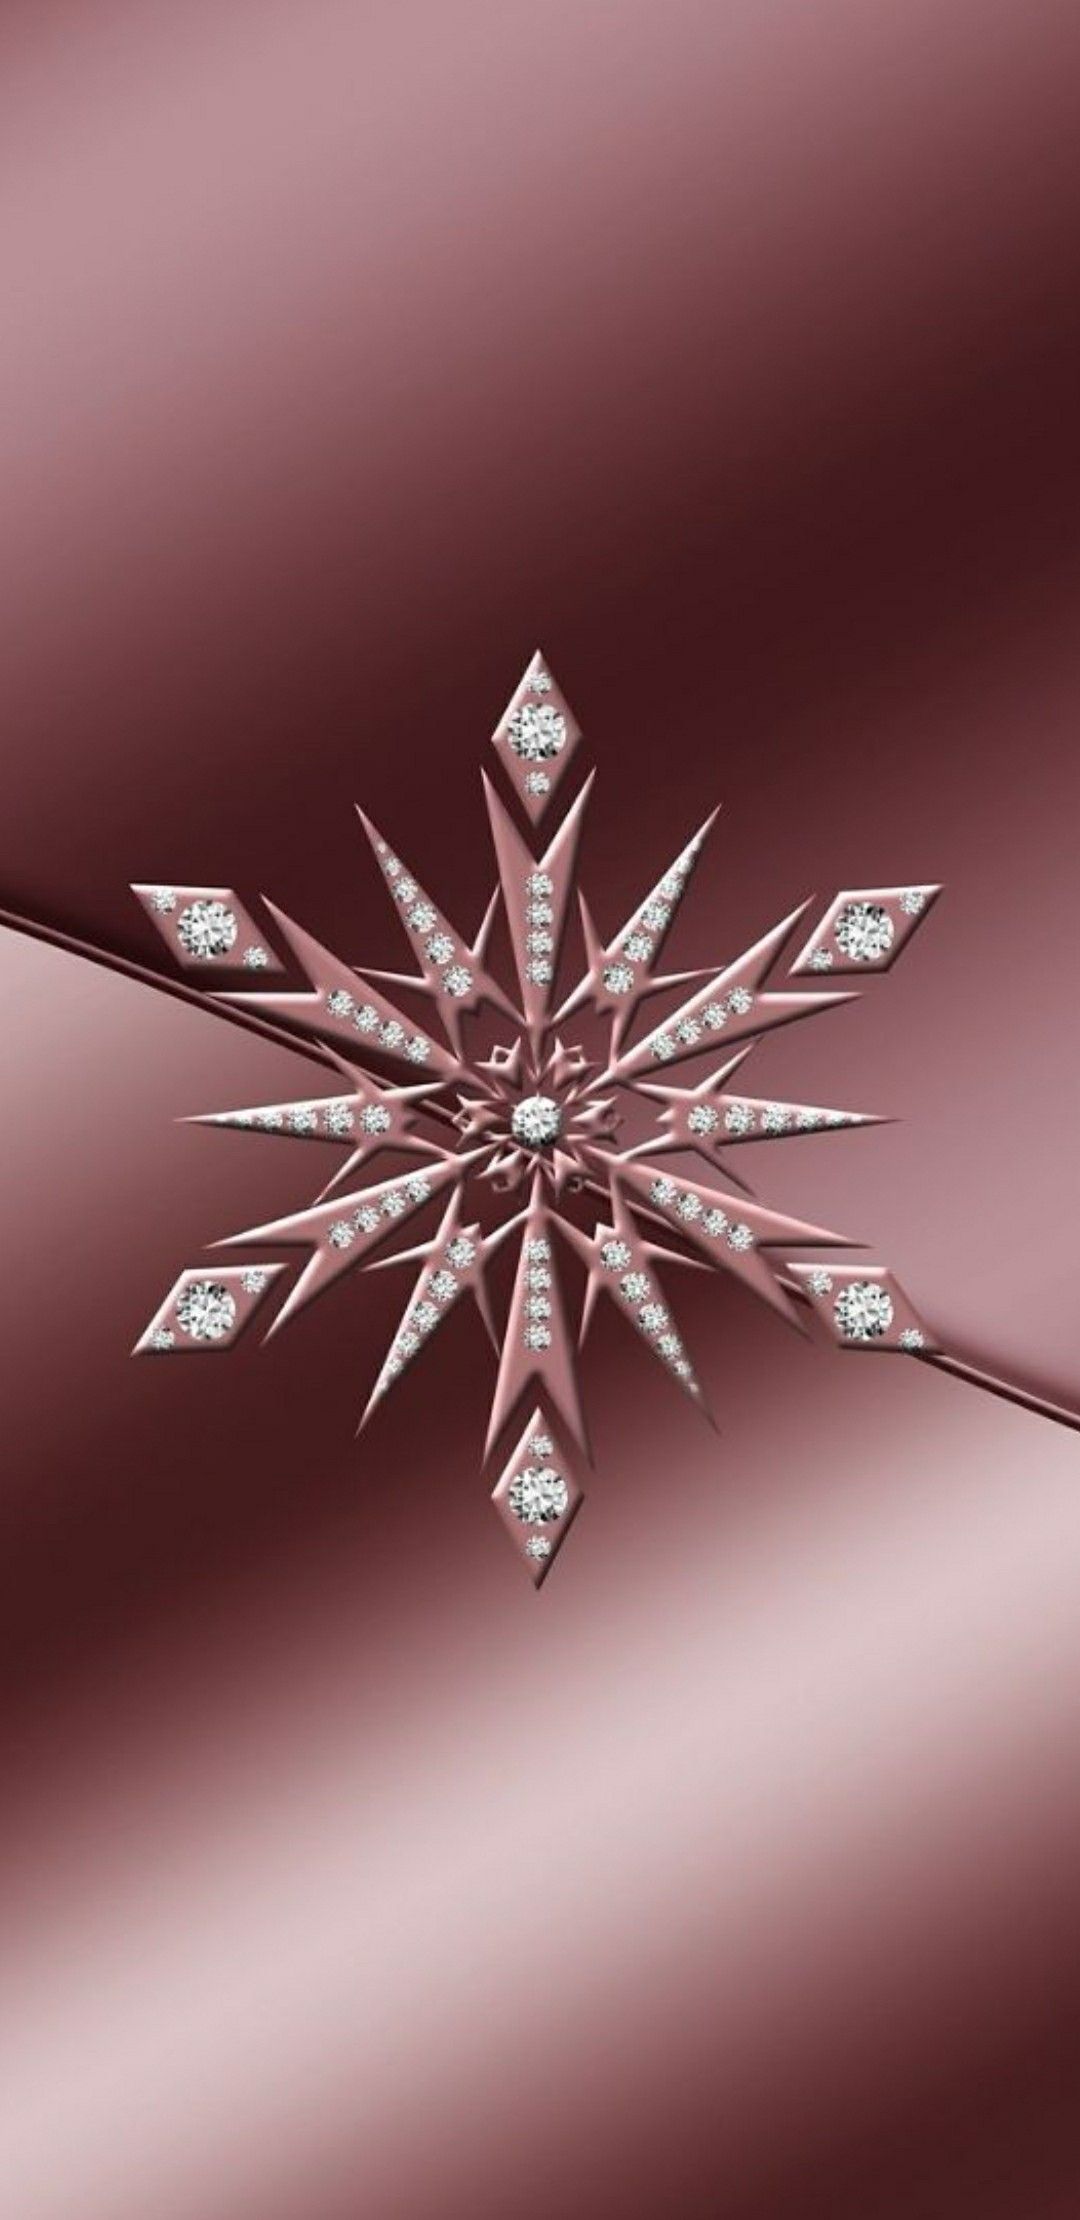 Rose Gold Snowflake Wallpaper. By Artist Unknown. Snowflake wallpaper, Rose gold wallpaper, Wallpaper iphone christmas